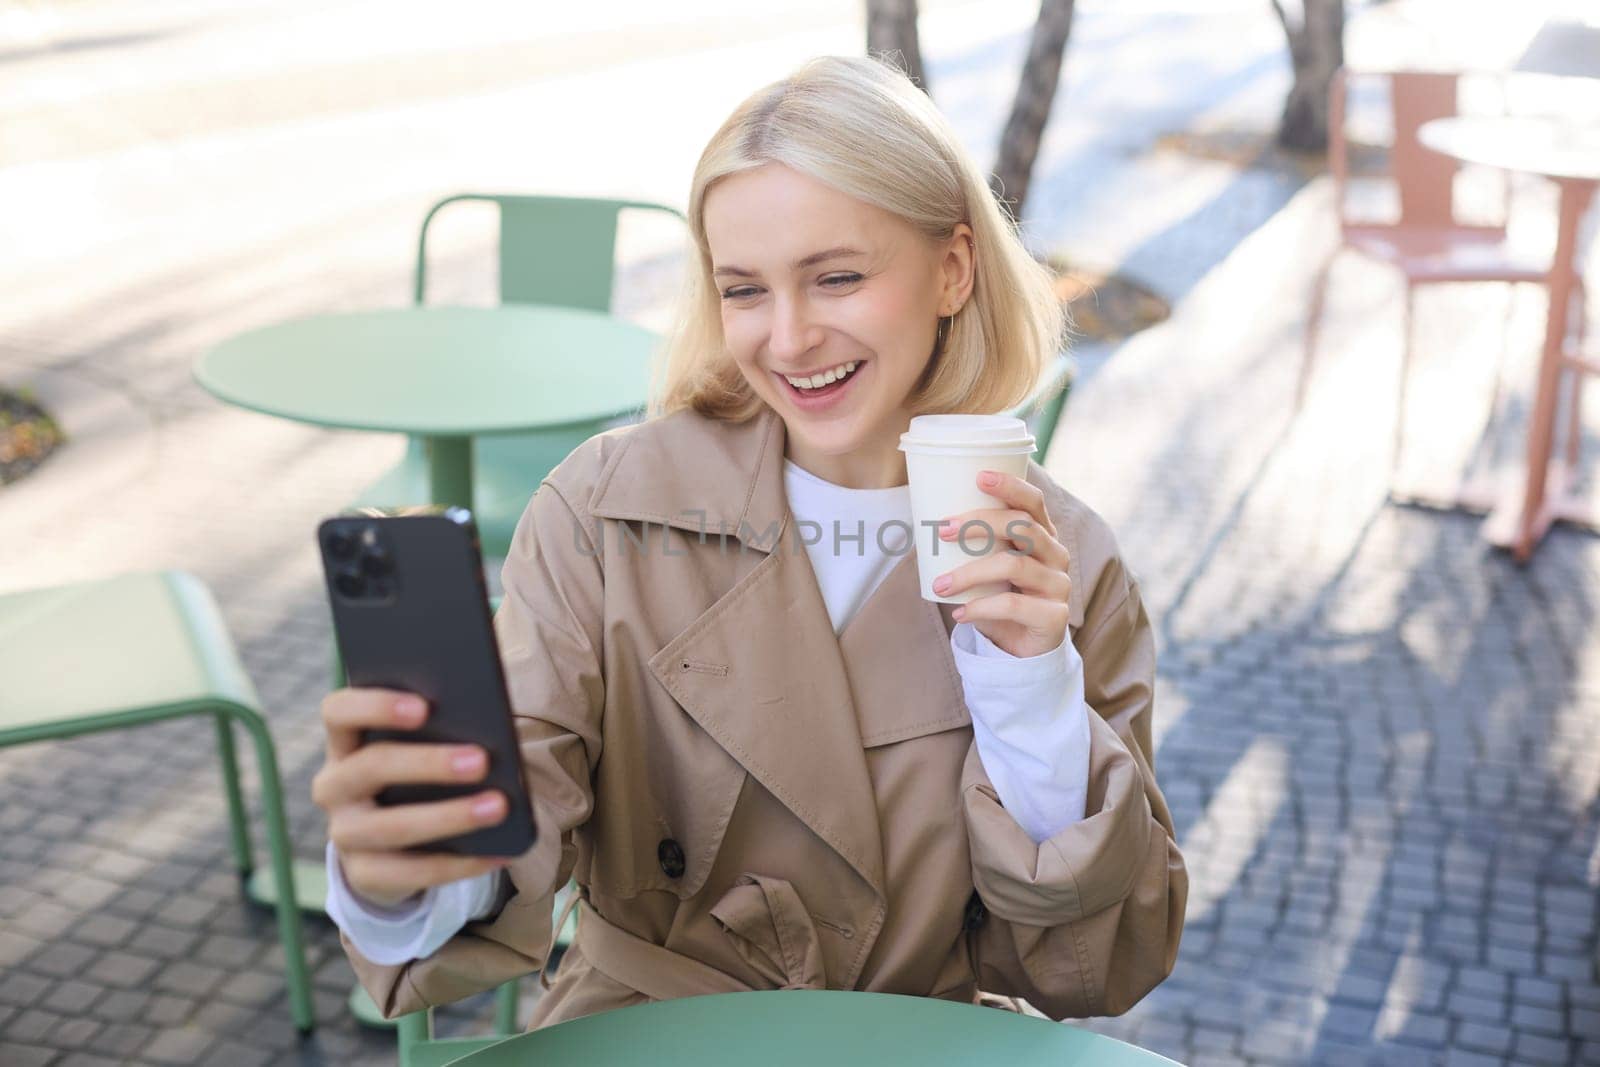 Stylish young woman, social media influencer, taking selfie, video chatting, using smartphone, drinking coffee outdoors in cafe.